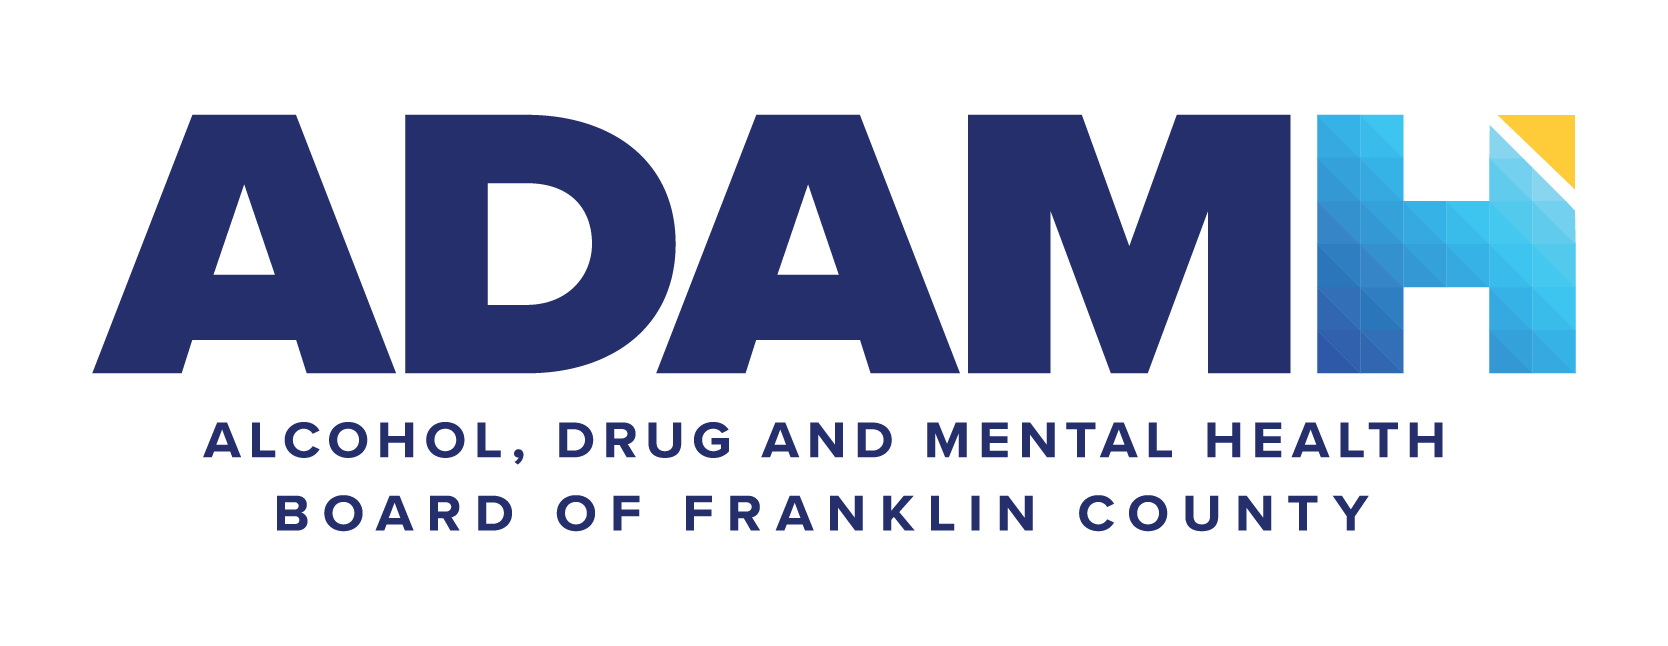 Alcohol, Drug, and Mental Health Board of Franklin County logo